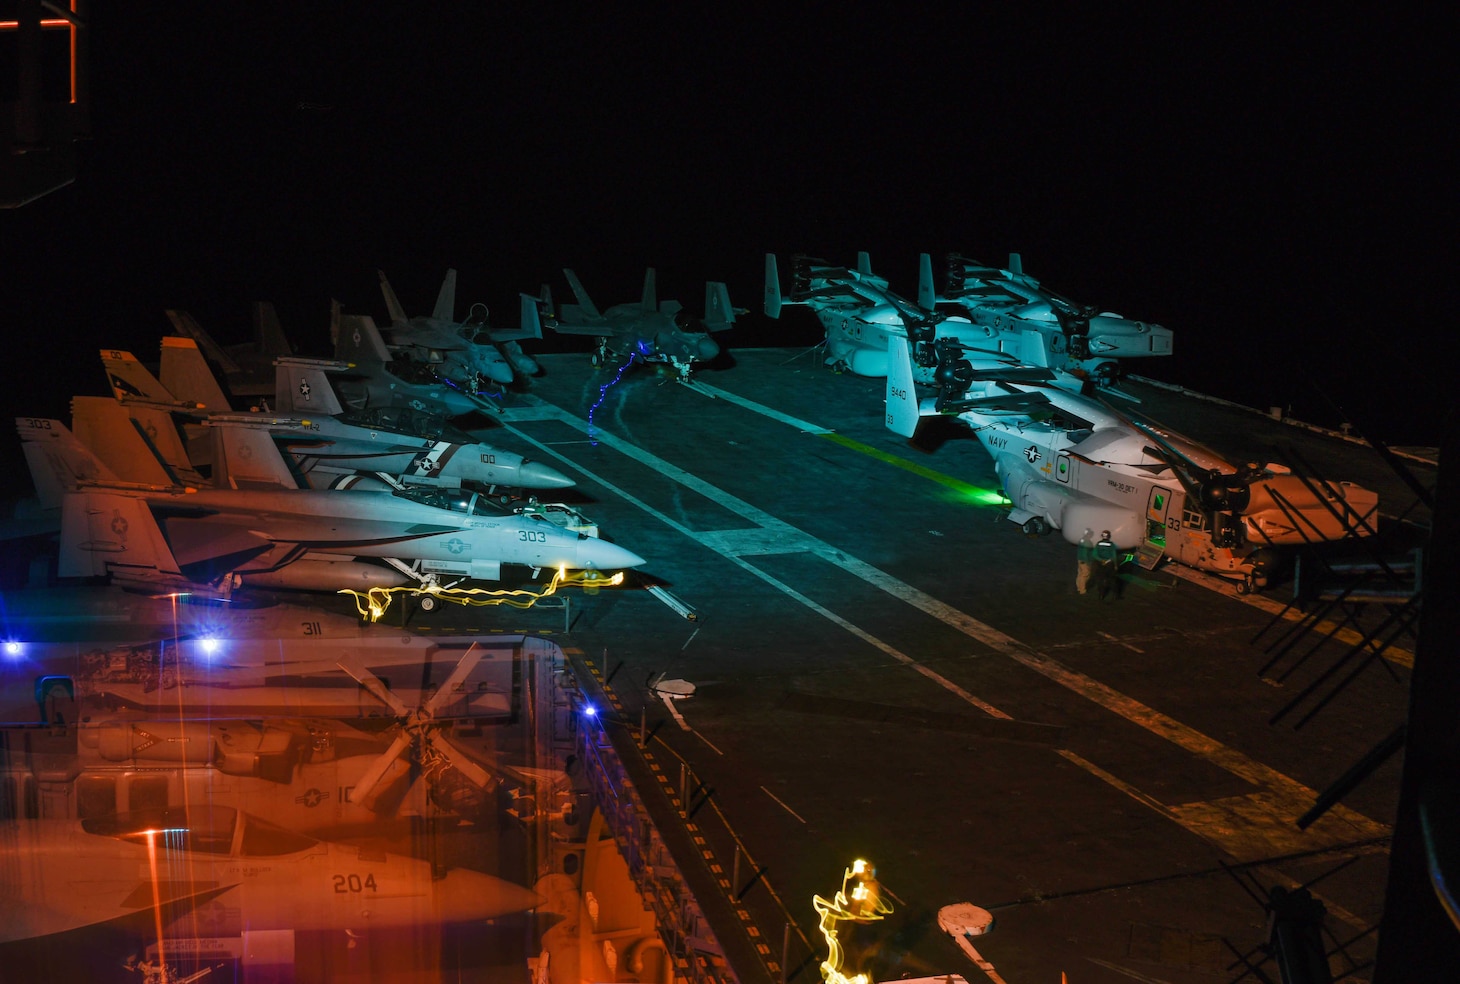 SOUTH CHINA SEA (Sept. 5, 2021) Sailors assigned to Nimitz-class aircraft carrier USS Carl Vinson (CVN 70) move aircraft from the hangar bay to the flight deck Sept. 5, 2021. Carl Vinson Carrier Strike Group is on a scheduled deployment in the U.S. 7th Fleet area of operations to enhance interoperability with allies and partners while serving as a ready-response force in support of a free and open Indo-Pacific region. (U.S. Navy photo by Mass Communication Specialist 2nd Class Christian M. Huntington)